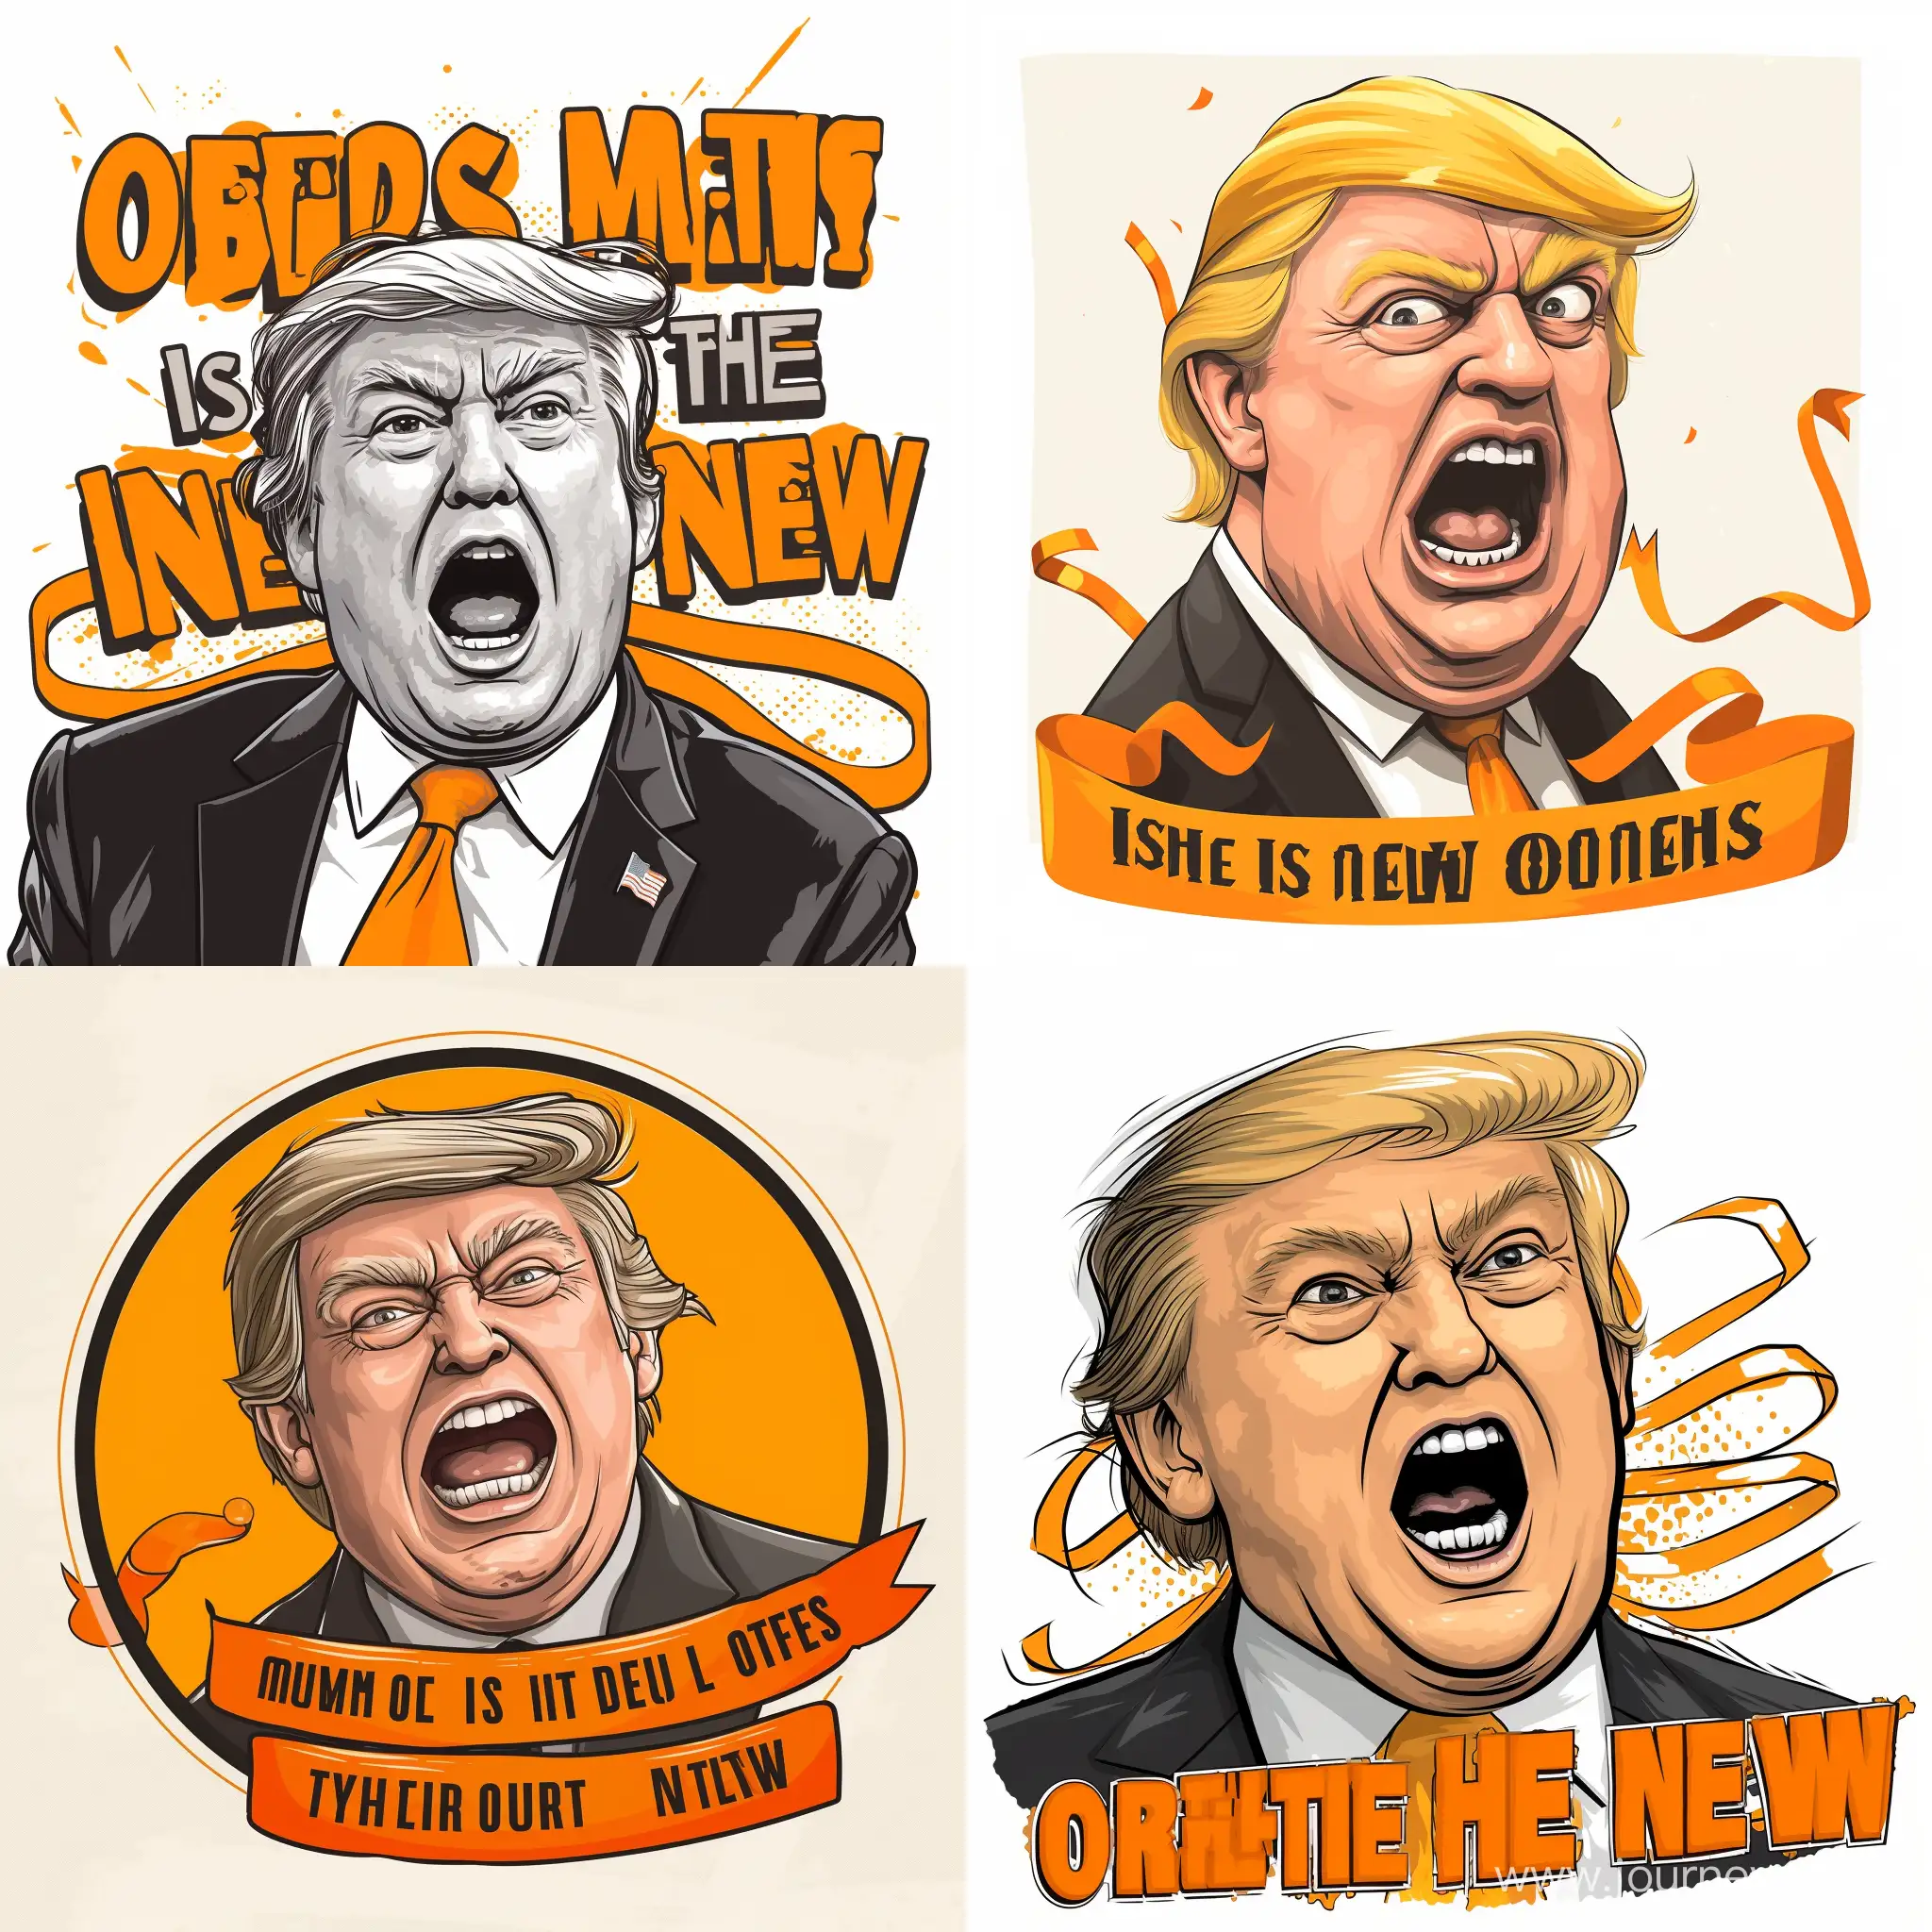 Action: Generate a creative and impactful typography vector illustration evoking a sense of humor, amusing illustrate USA former president Donald Trump caricature with exaggerated expressions. Incorporate elements such some creative puns, ribbon, and shapes that look the design more esthetical.

Typography: Orange is the new Orange. The words should be in a bold, prominent font, drawing attention to it as a key part of the main message. 'Is the new' should be contrastingly, possibly smaller and in a more whimsical or casual font, to underline the humor.  

Fonts Instructions: Select, Implement and placement a font that is bold, and legible. Must implement each of the word correctly. It is essential that the of text must be spelled correctly and prominently featured in the design. Split each of word to put in design the best sequential combination and clearly visible into the final design. The text should be easily readable from a distance. Never put any other additional texts or words.

Design Instructions: The overall layout should be balanced and aesthetically pleasing, with a clever use of spacing and alignment to enhance the comedic effect. The design should be both visually compelling and thought-provoking to give a more authentic look. Ensure the design is symmetrical and well-aligned accordingly. Ensure the final design edges not cut off or side off. Never use any mockup, just create the artwork with a perfect blank space all the edges.

Color: Stick to the traditional color like black and yellow in White background. 